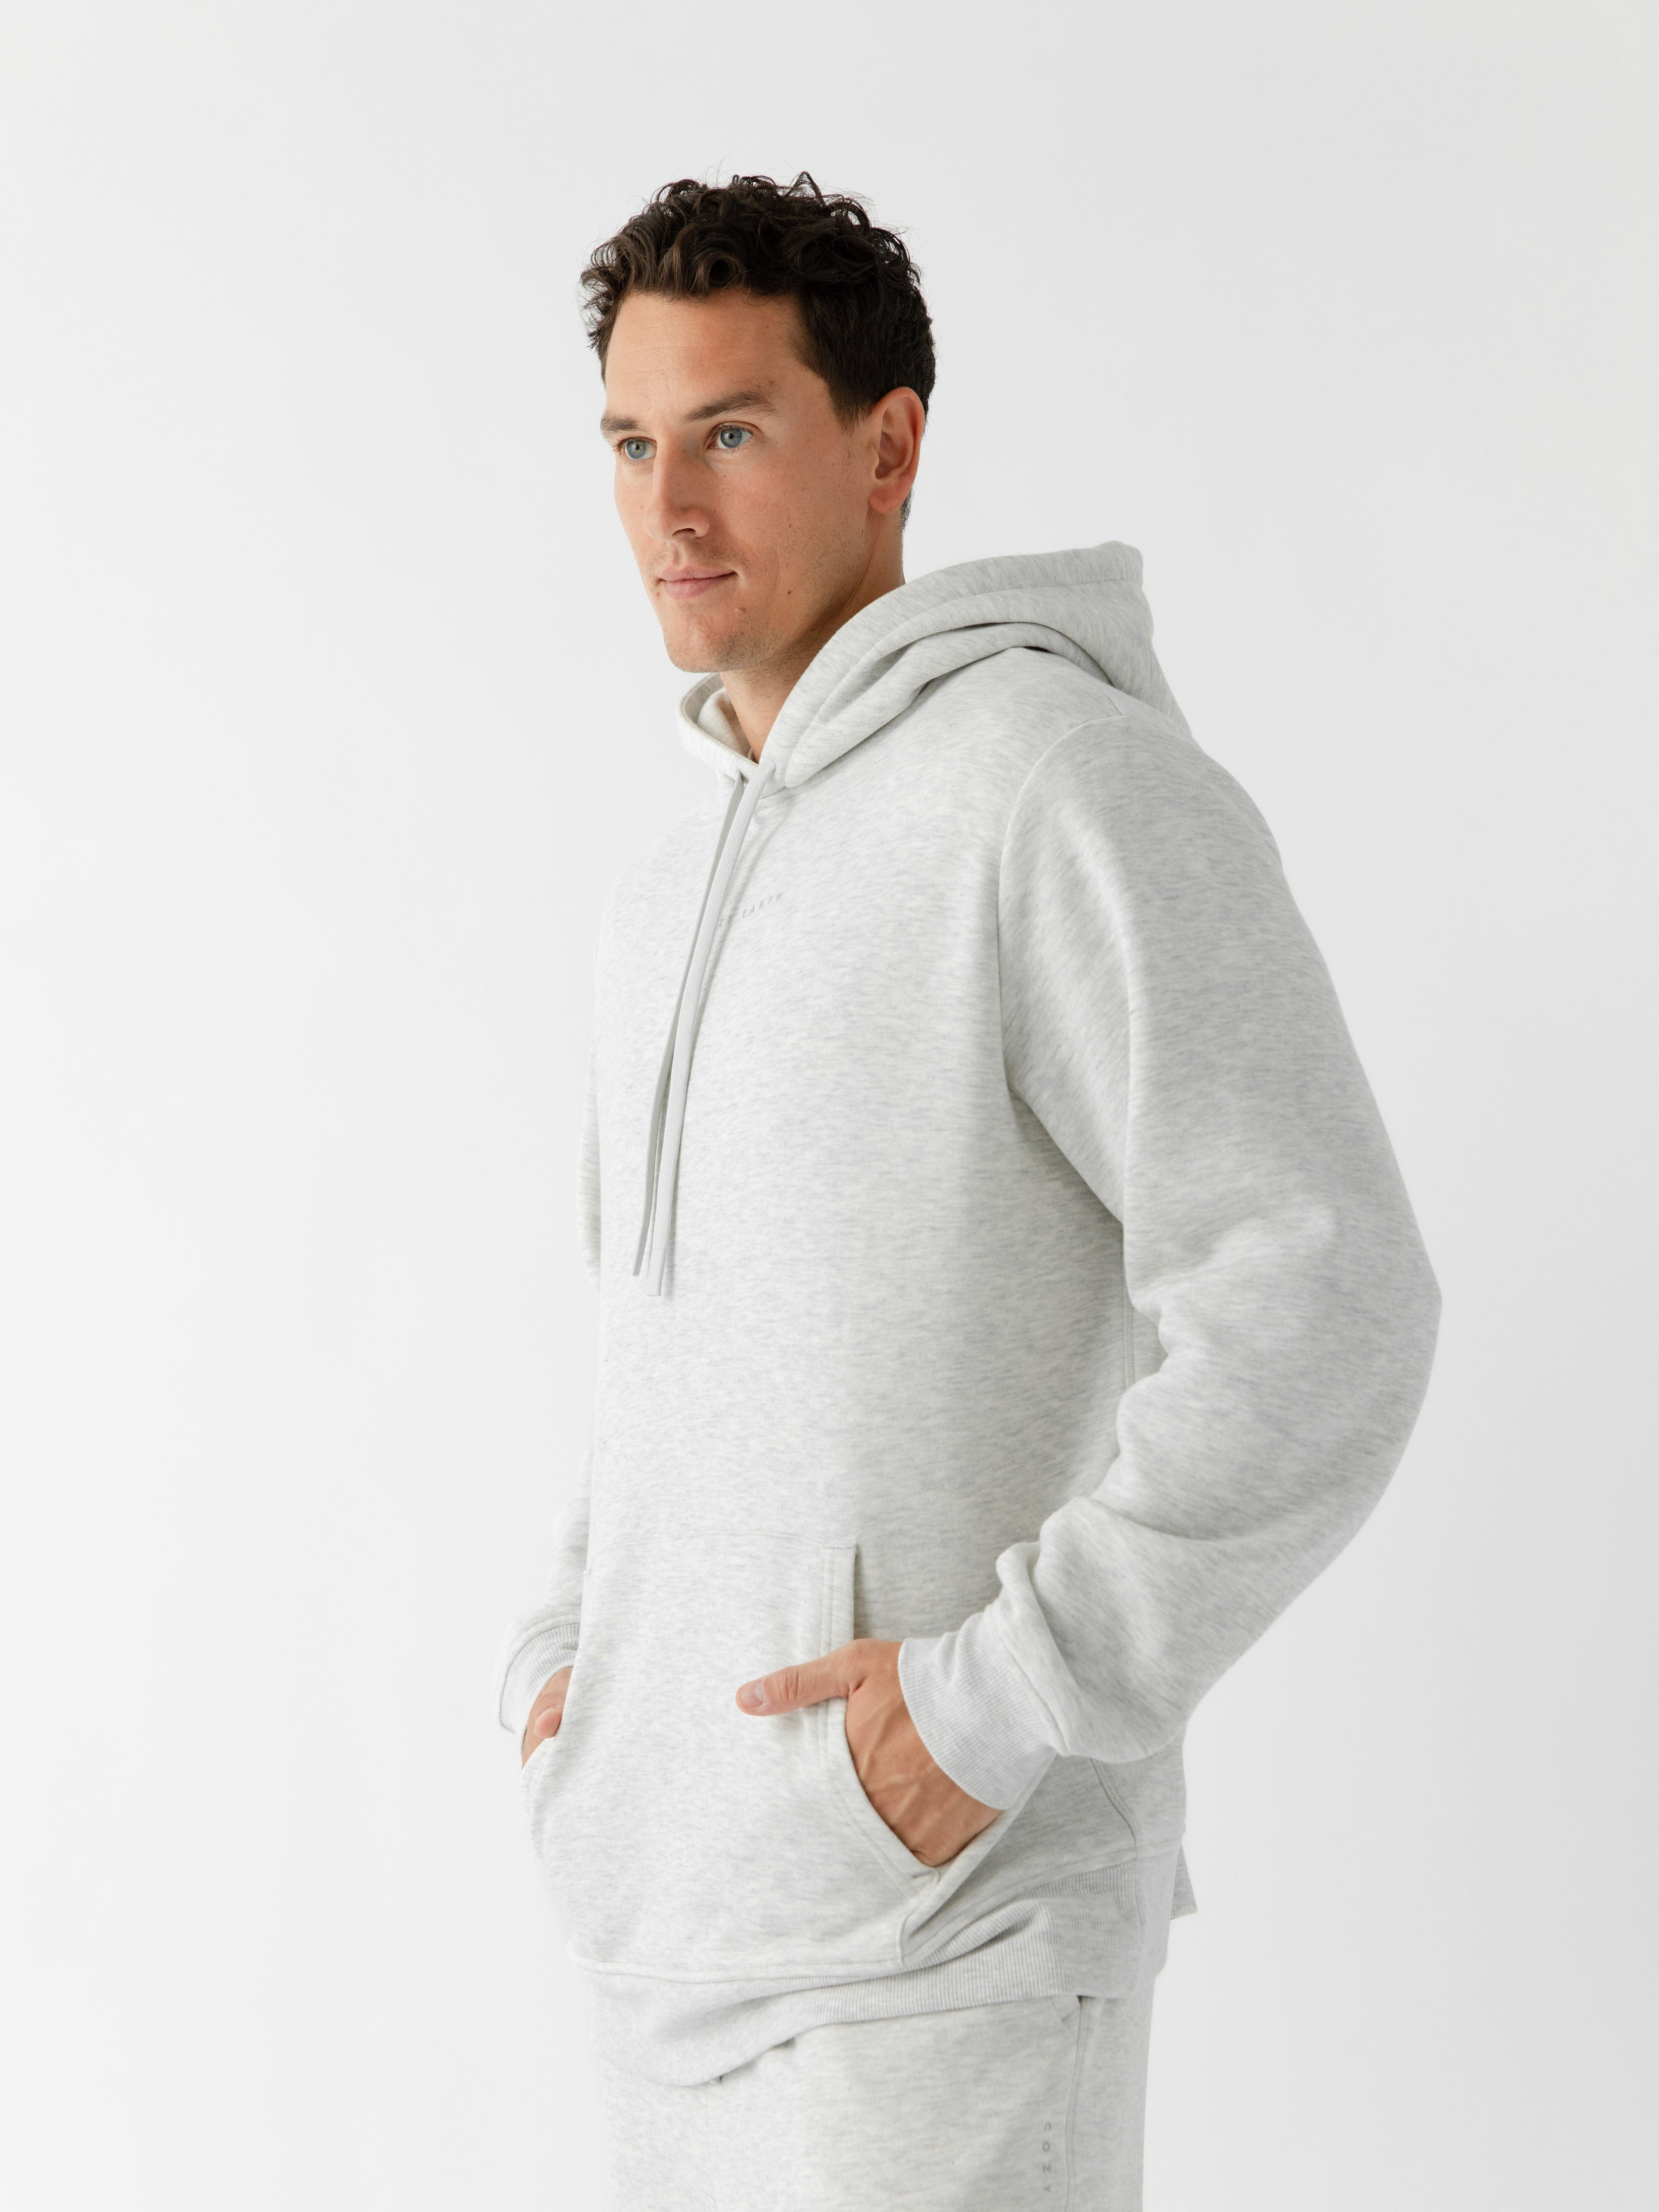 Man wearing heather grey cityscape hoodie with white background |Color:Heather Grey